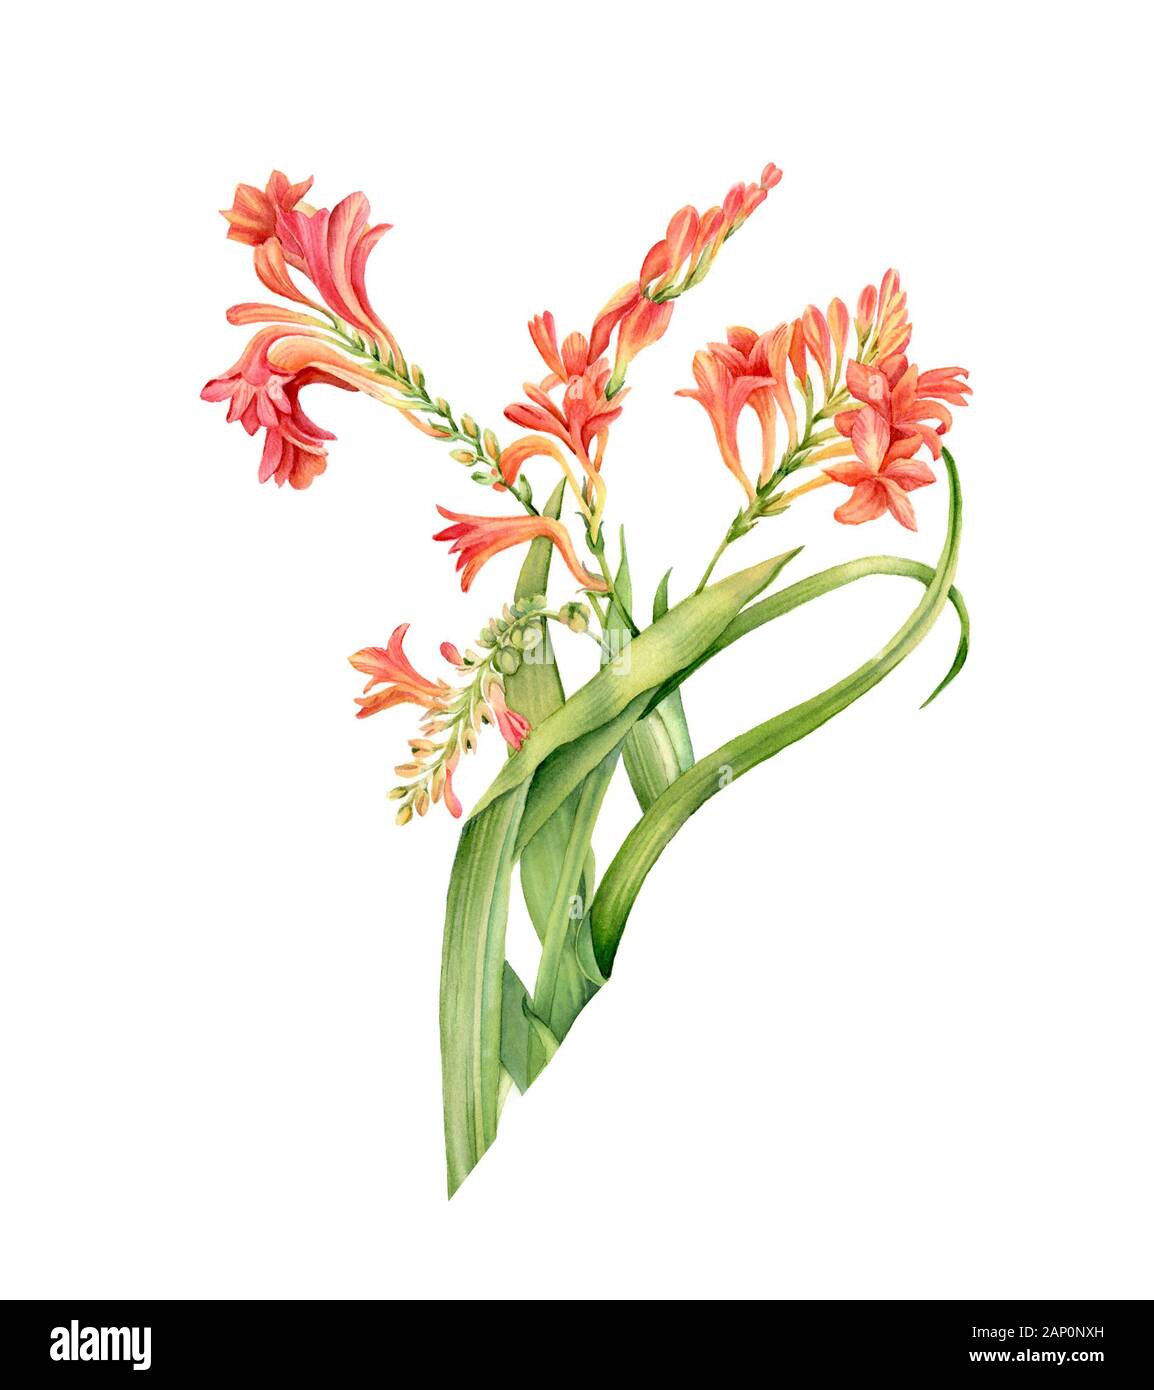 Watercolor crocosmia plant in bloom. Colourful tropical flower isolated on white. Botanical floral illustration for wedding design, cosmetics Stock Photo